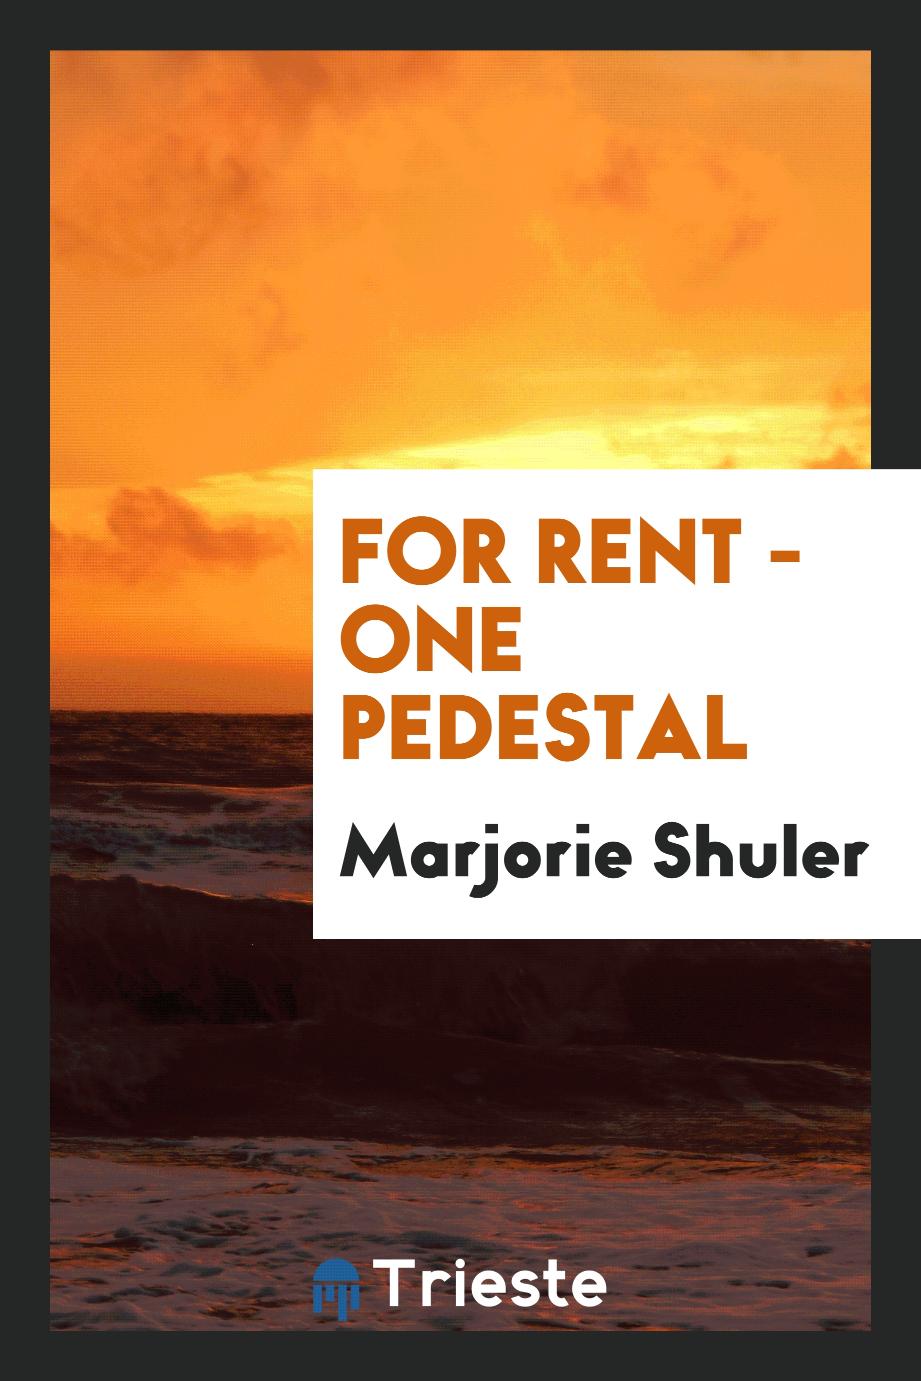 For Rent - One Pedestal